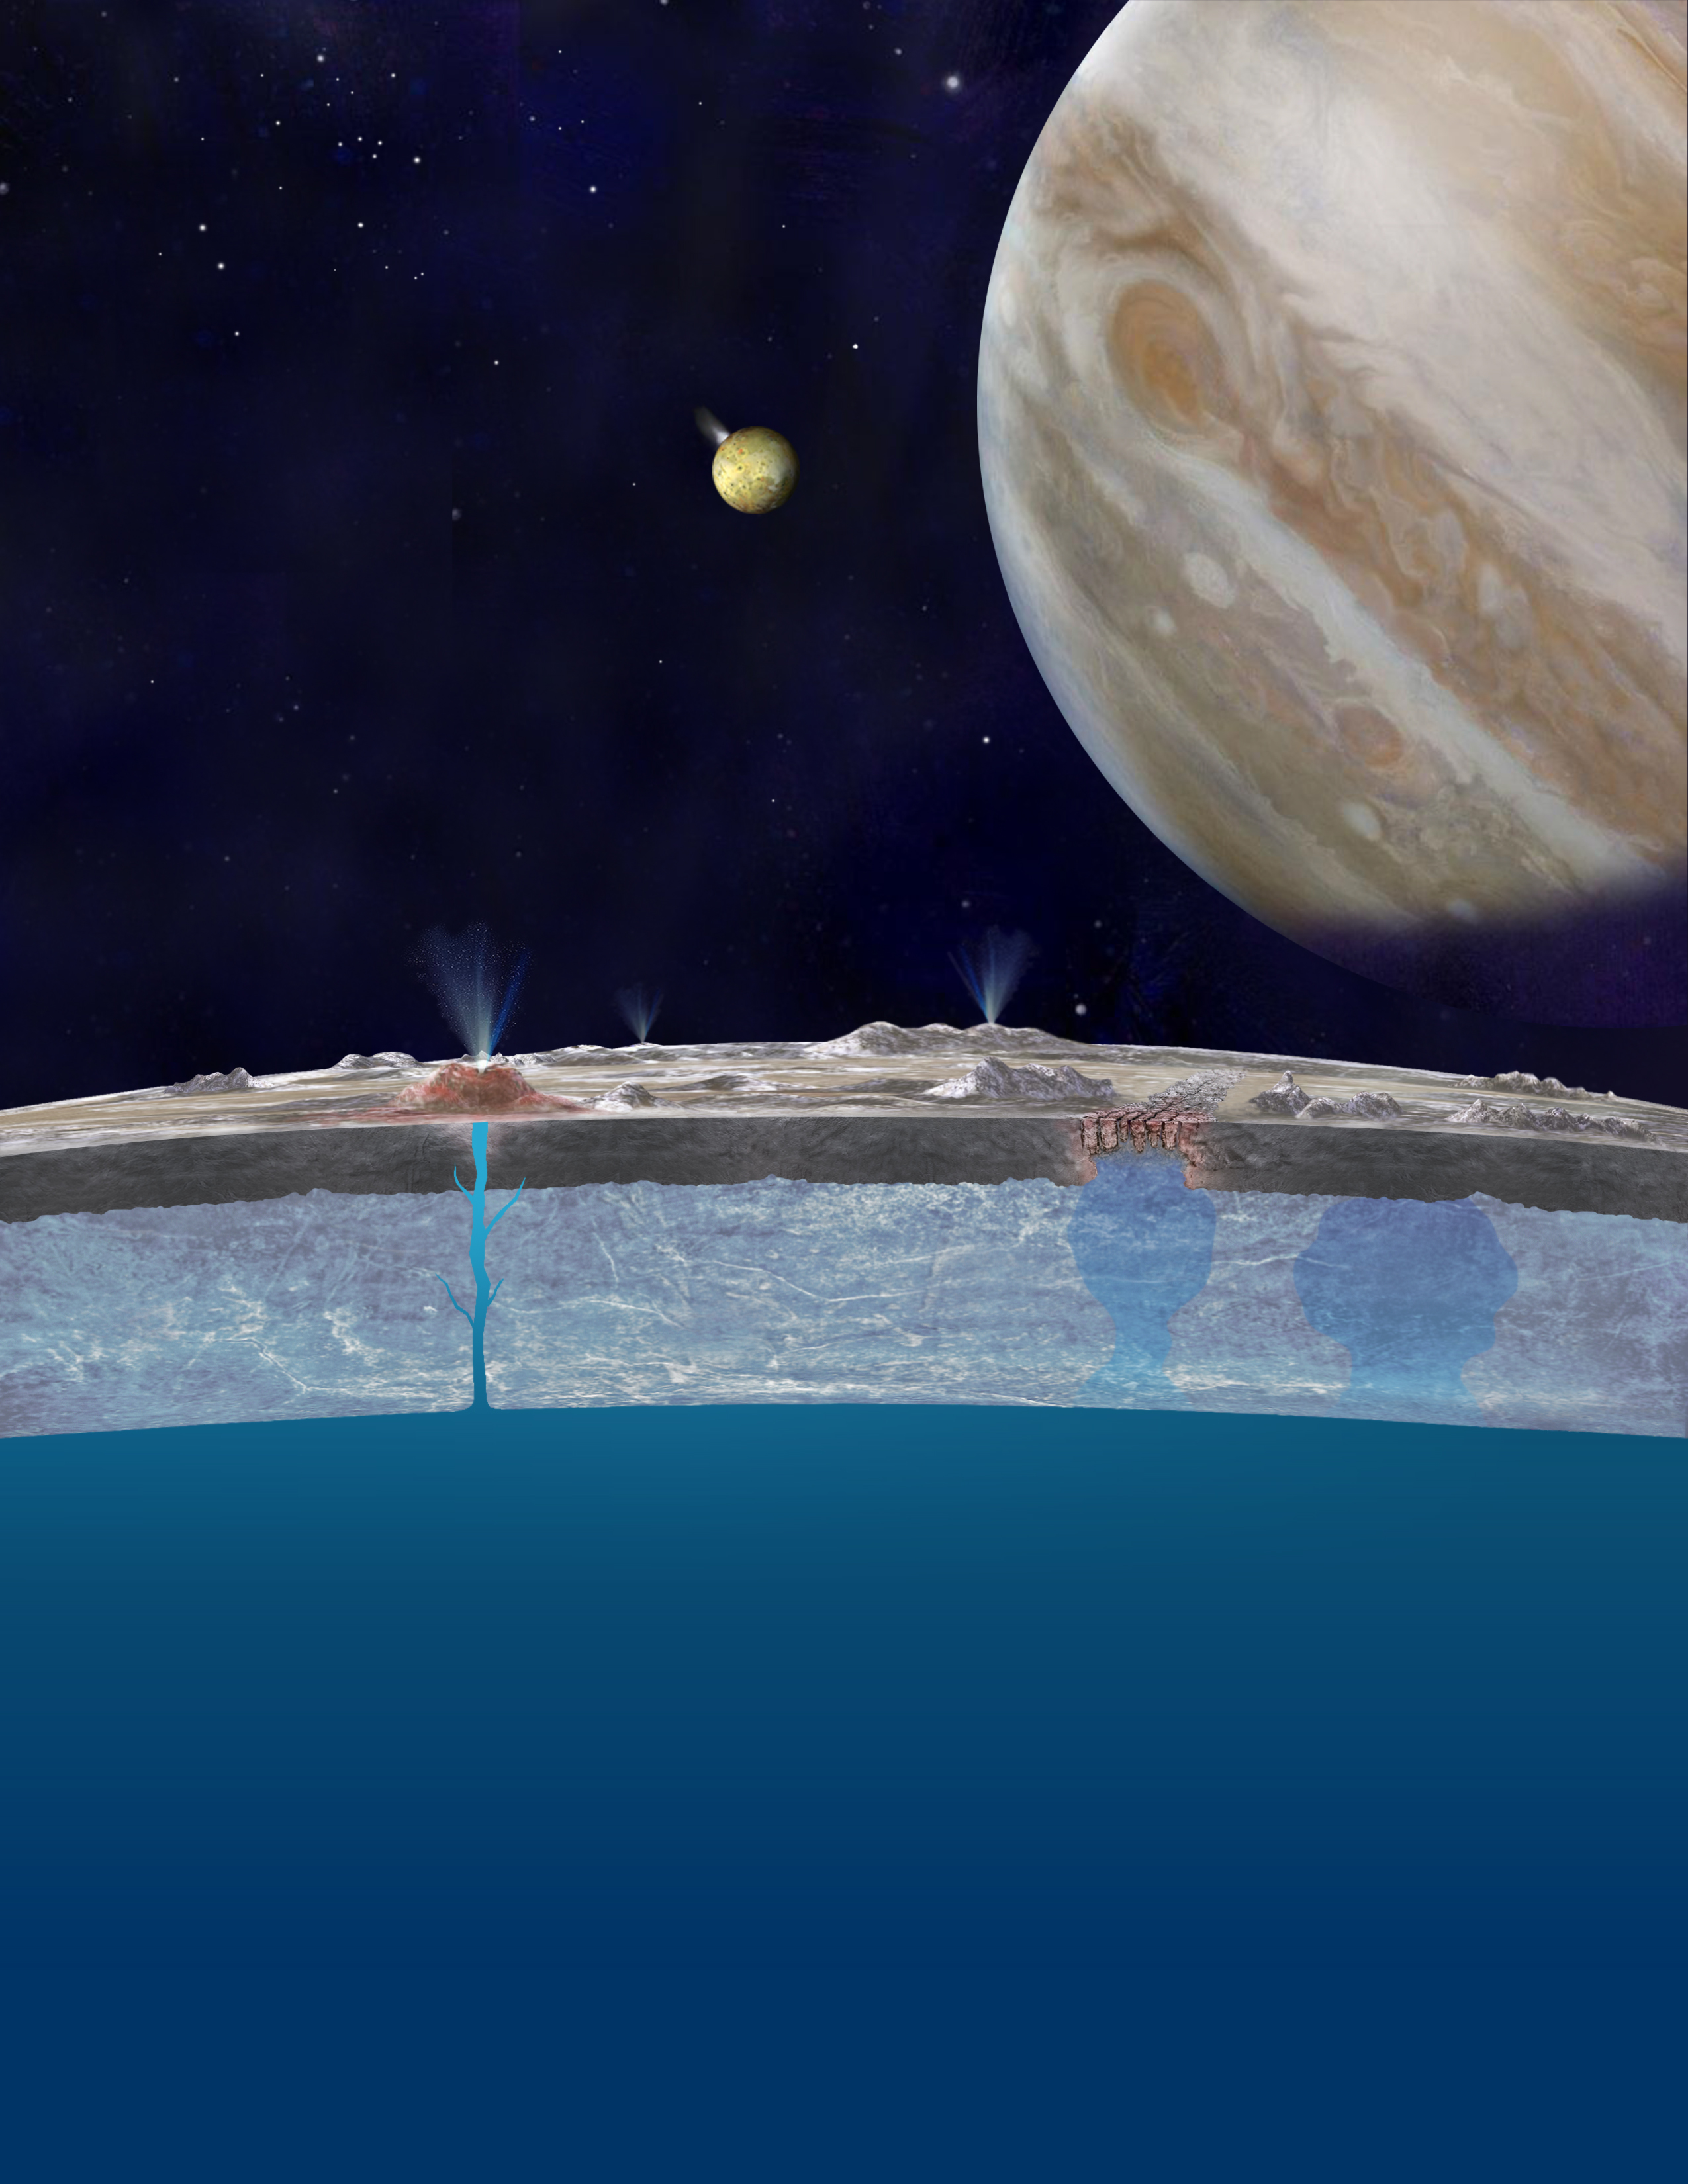 Cross-section through the outer zone of Europa’s south polar region showing plumes, the fractured ice shell, the liquid water ocean (cloudy at the base near hydrothermal plumes) and the rocky interior.